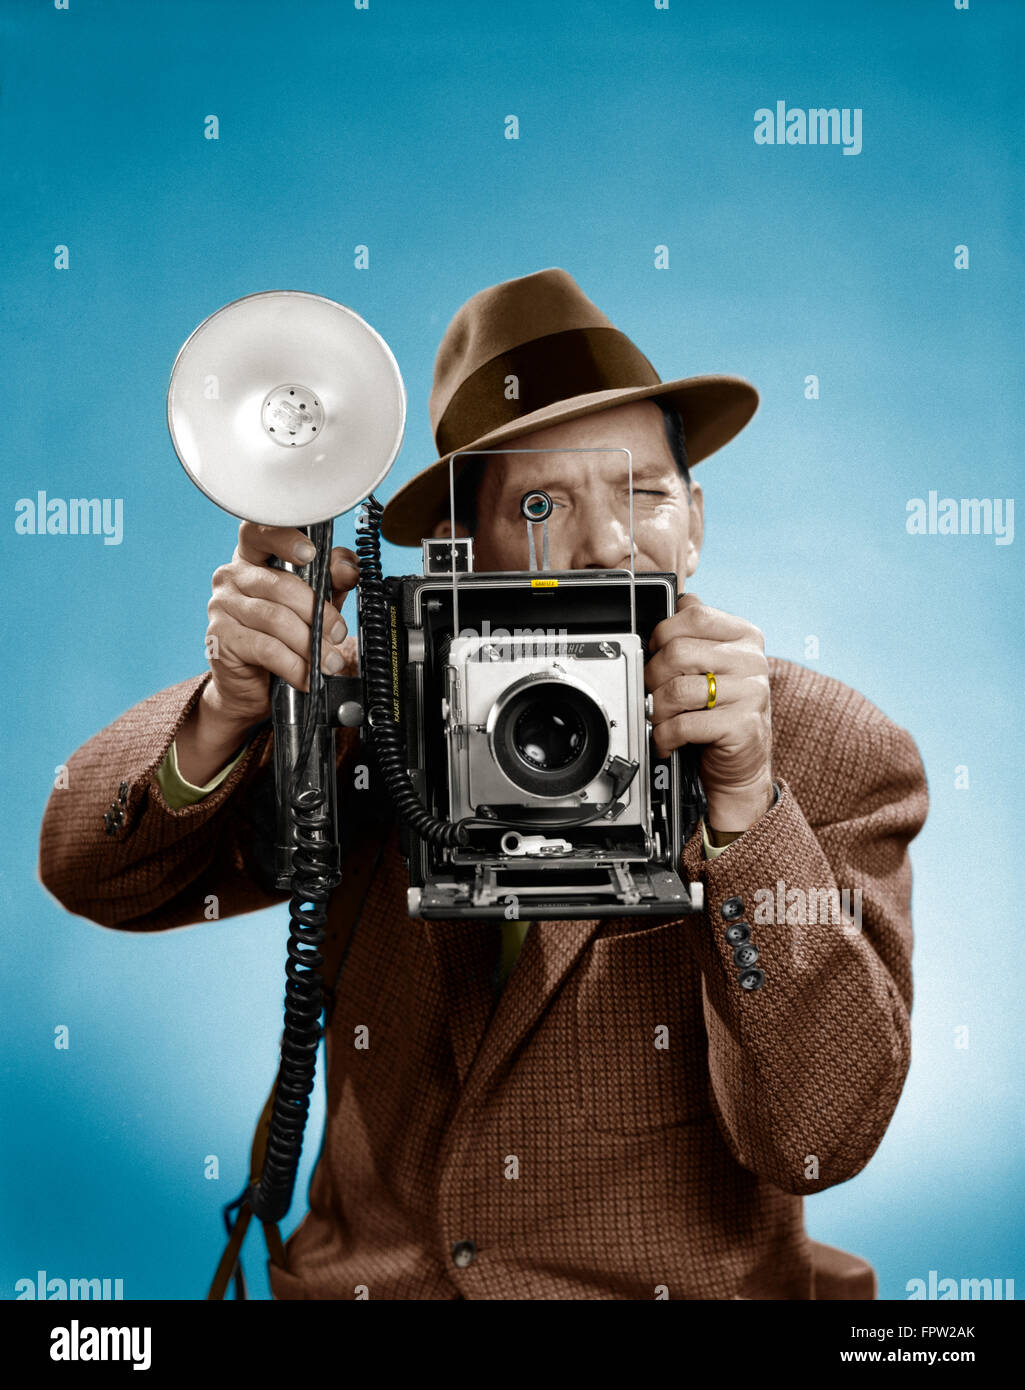 Photographer 4x5 Stock Photos & Photographer 4x5 Stock Images - Alamy